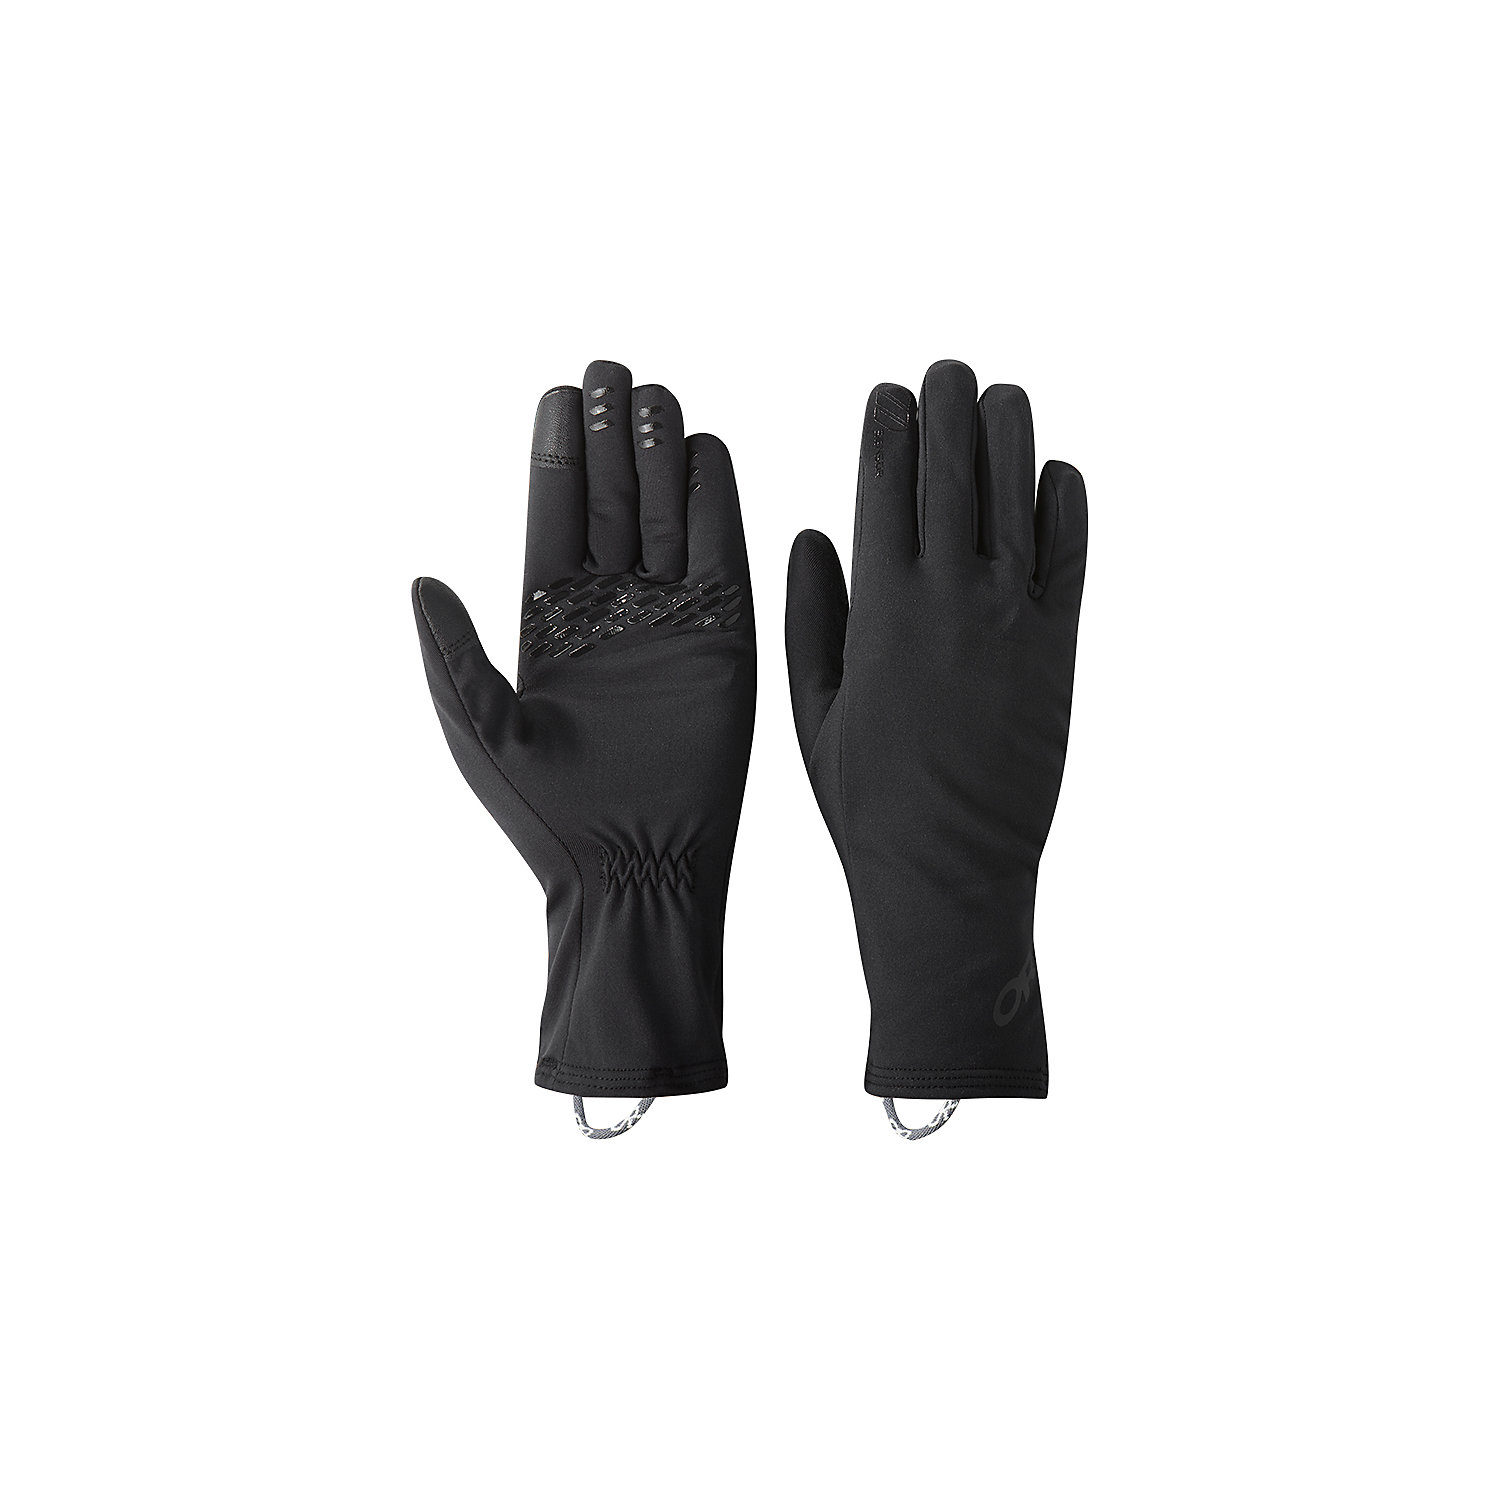 4F Full Finger Light Weight Cycling running outdoor Gloves Mens Women ladies Ant